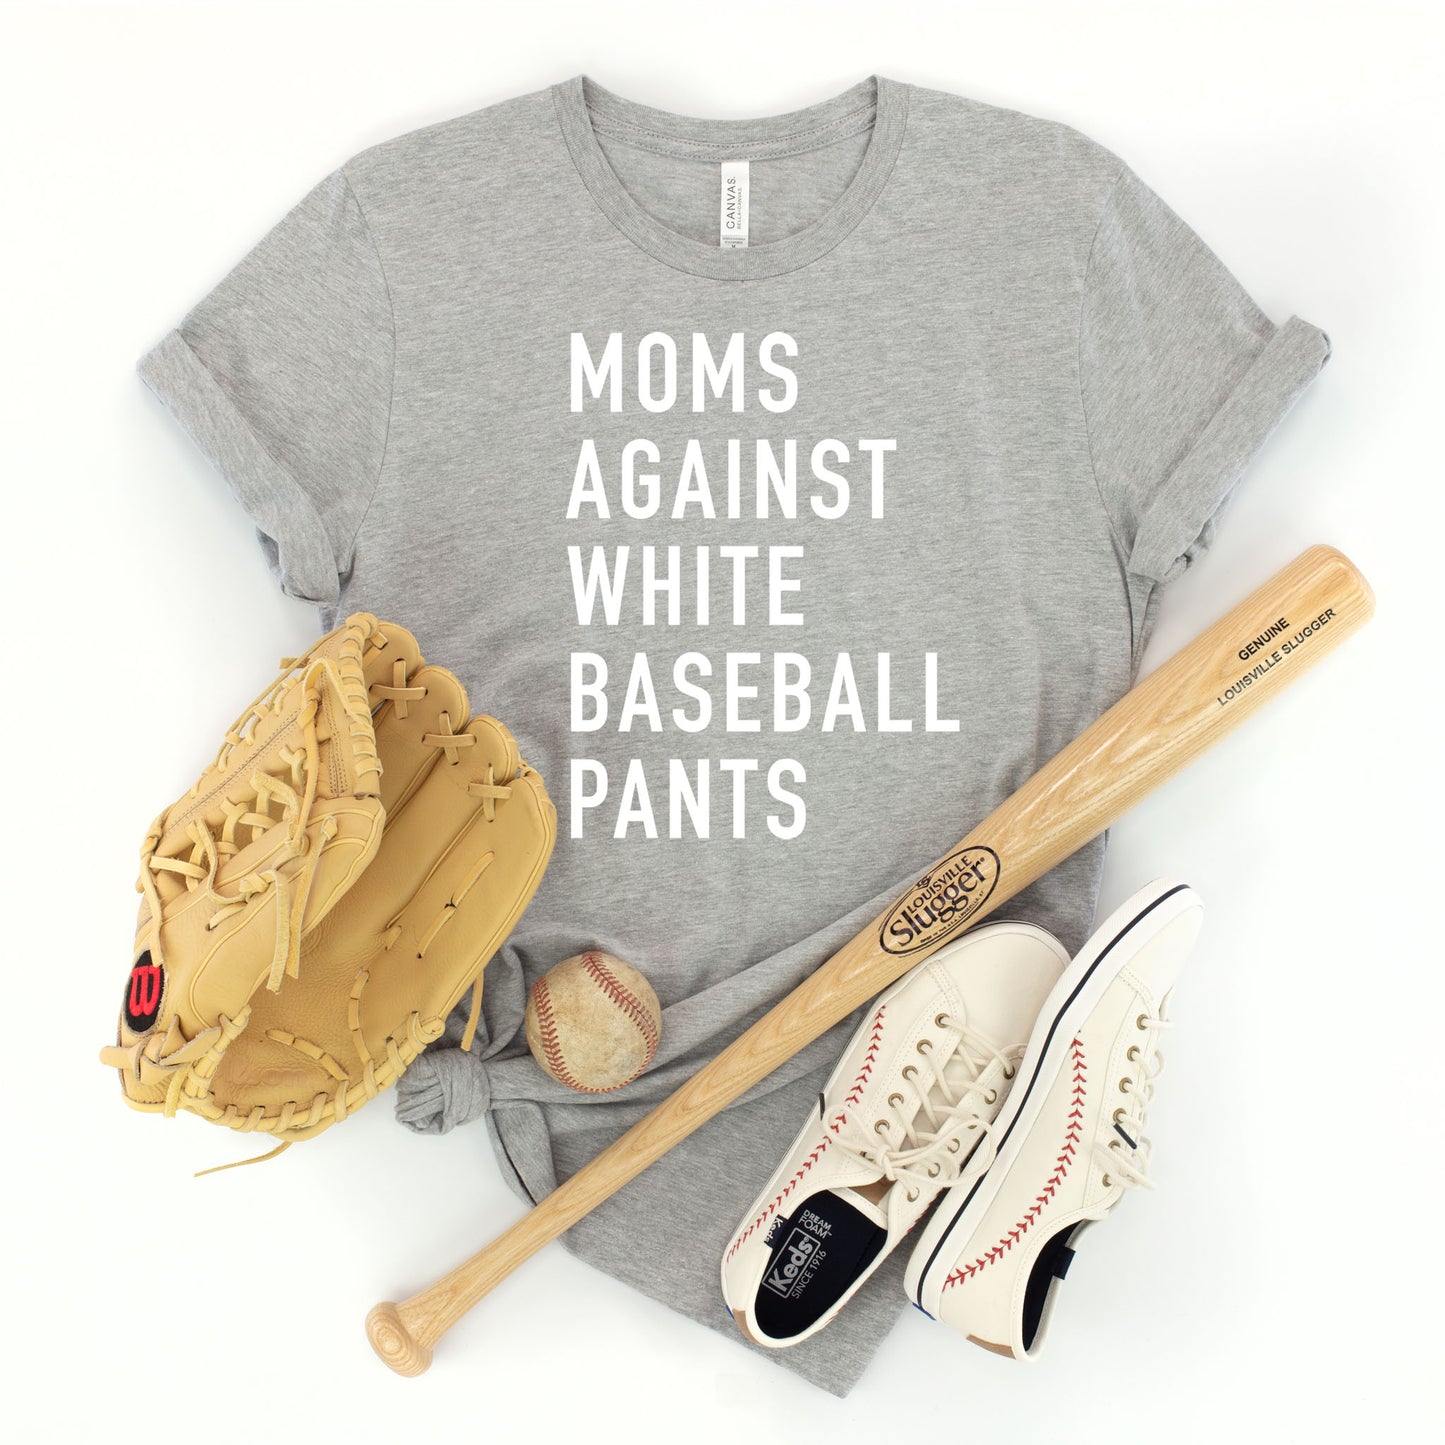 "Moms against" Heather Grey T-shirt  (Adult Only)